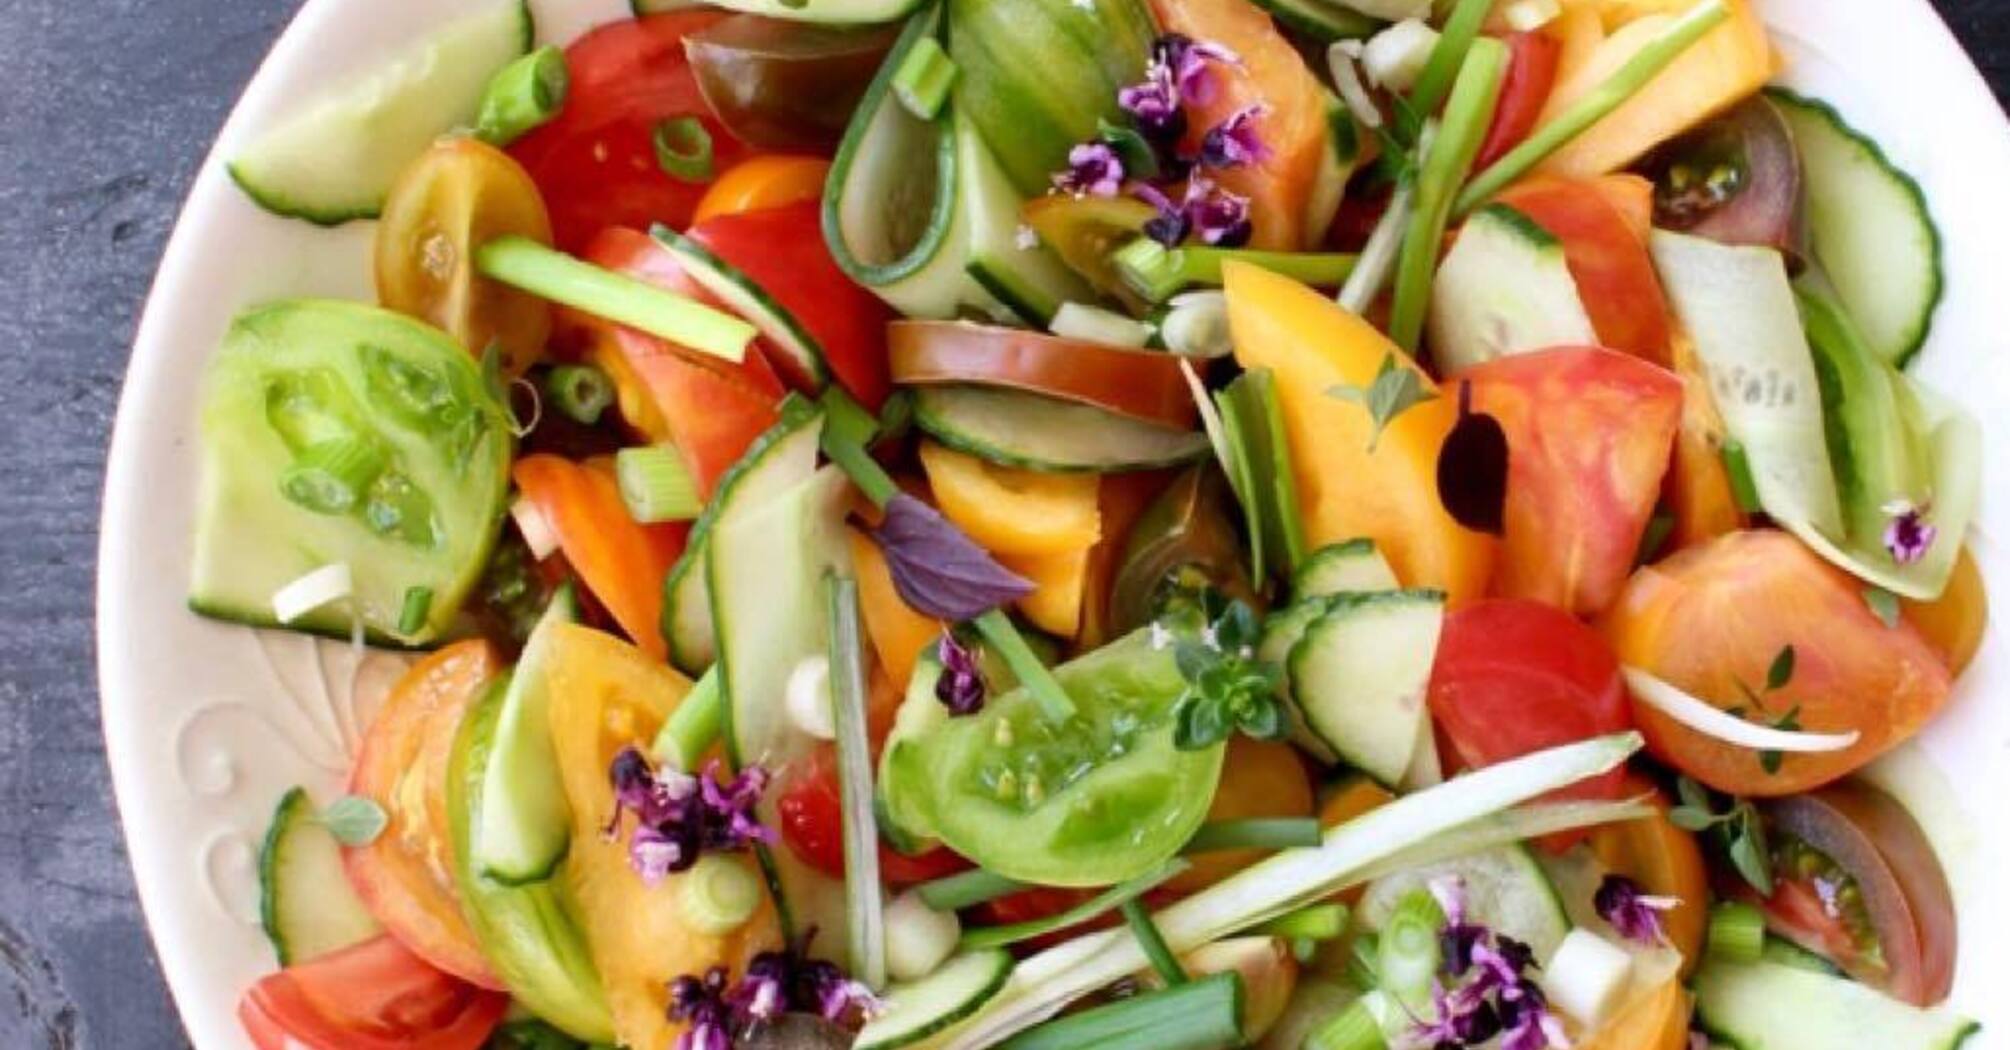 The 'deadly salad' that everyone ate: is it really dangerous?